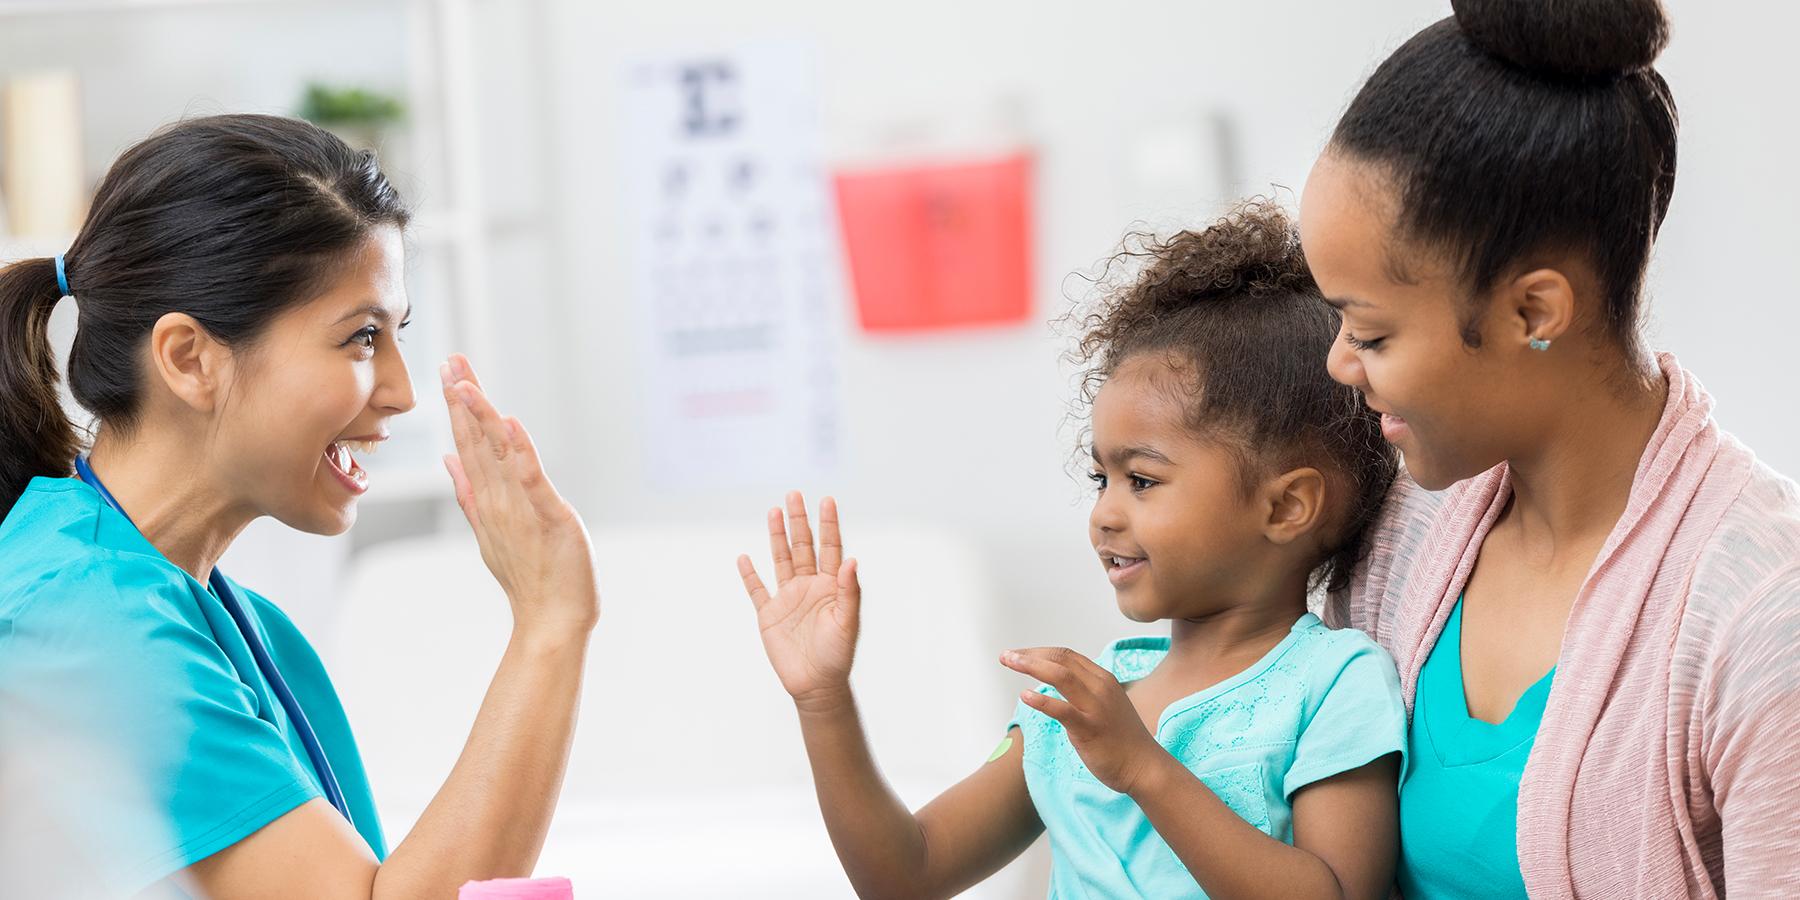 Caregiver holding smiling child who is giving a healthcare provider a high-five